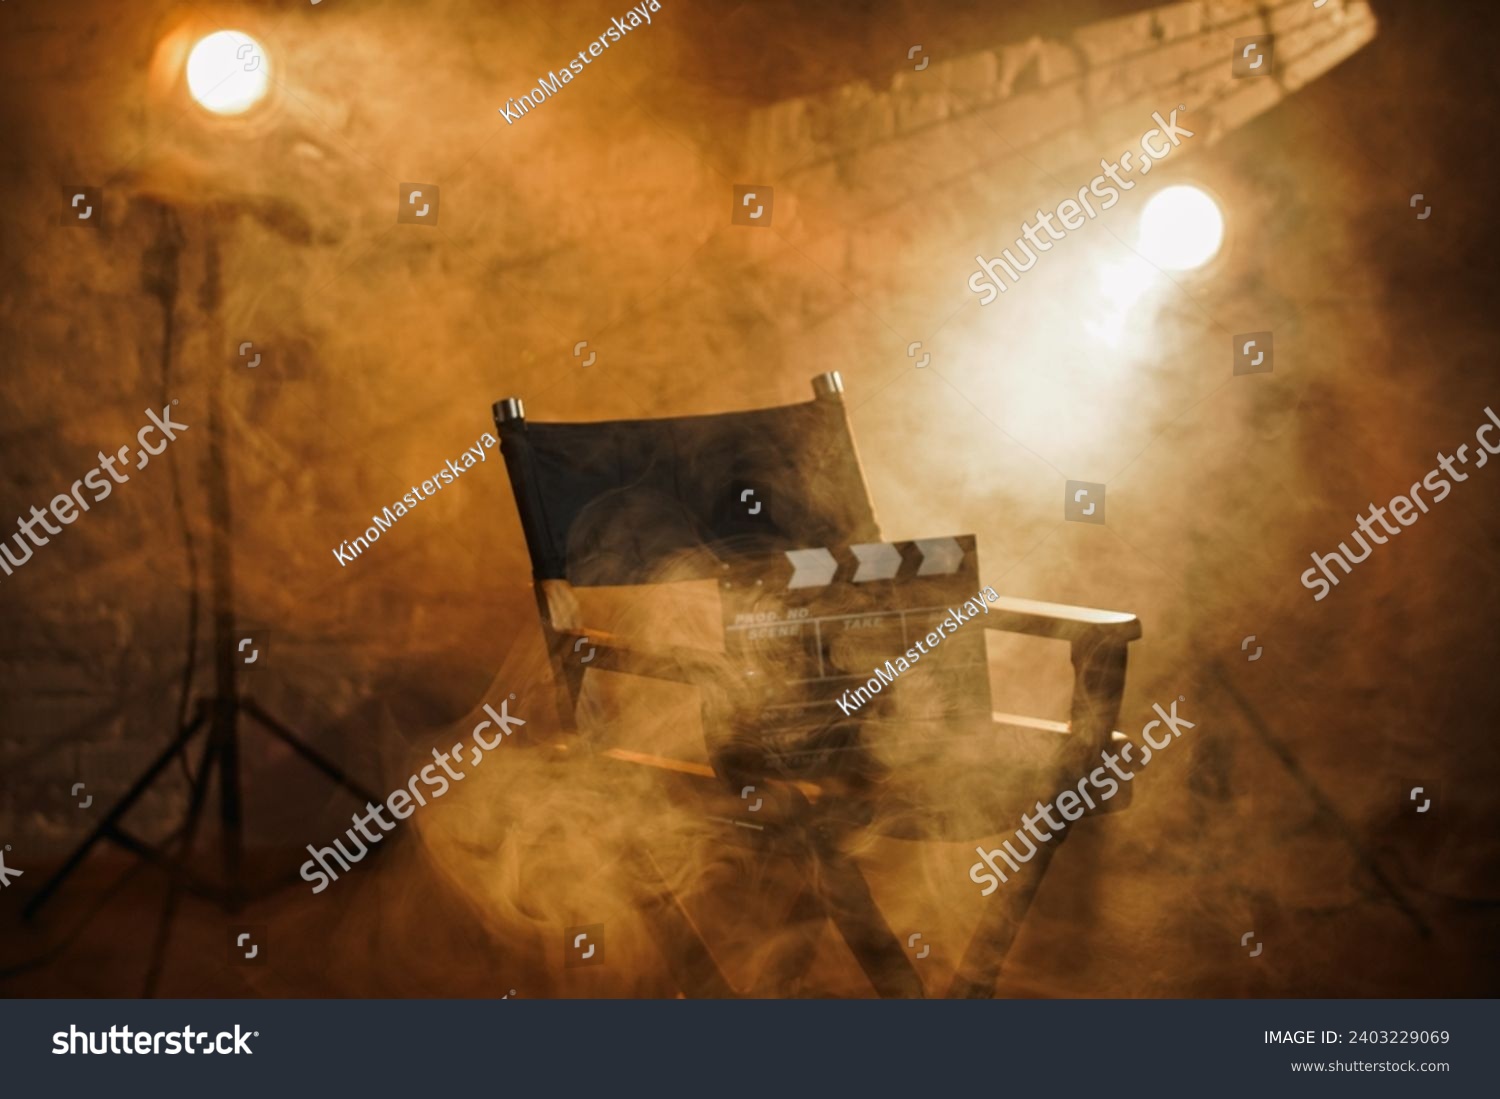 Close up shot of cinema clapperboard standing on director's chair, spotlights at the background, warm light and smoke in the scene. #2403229069